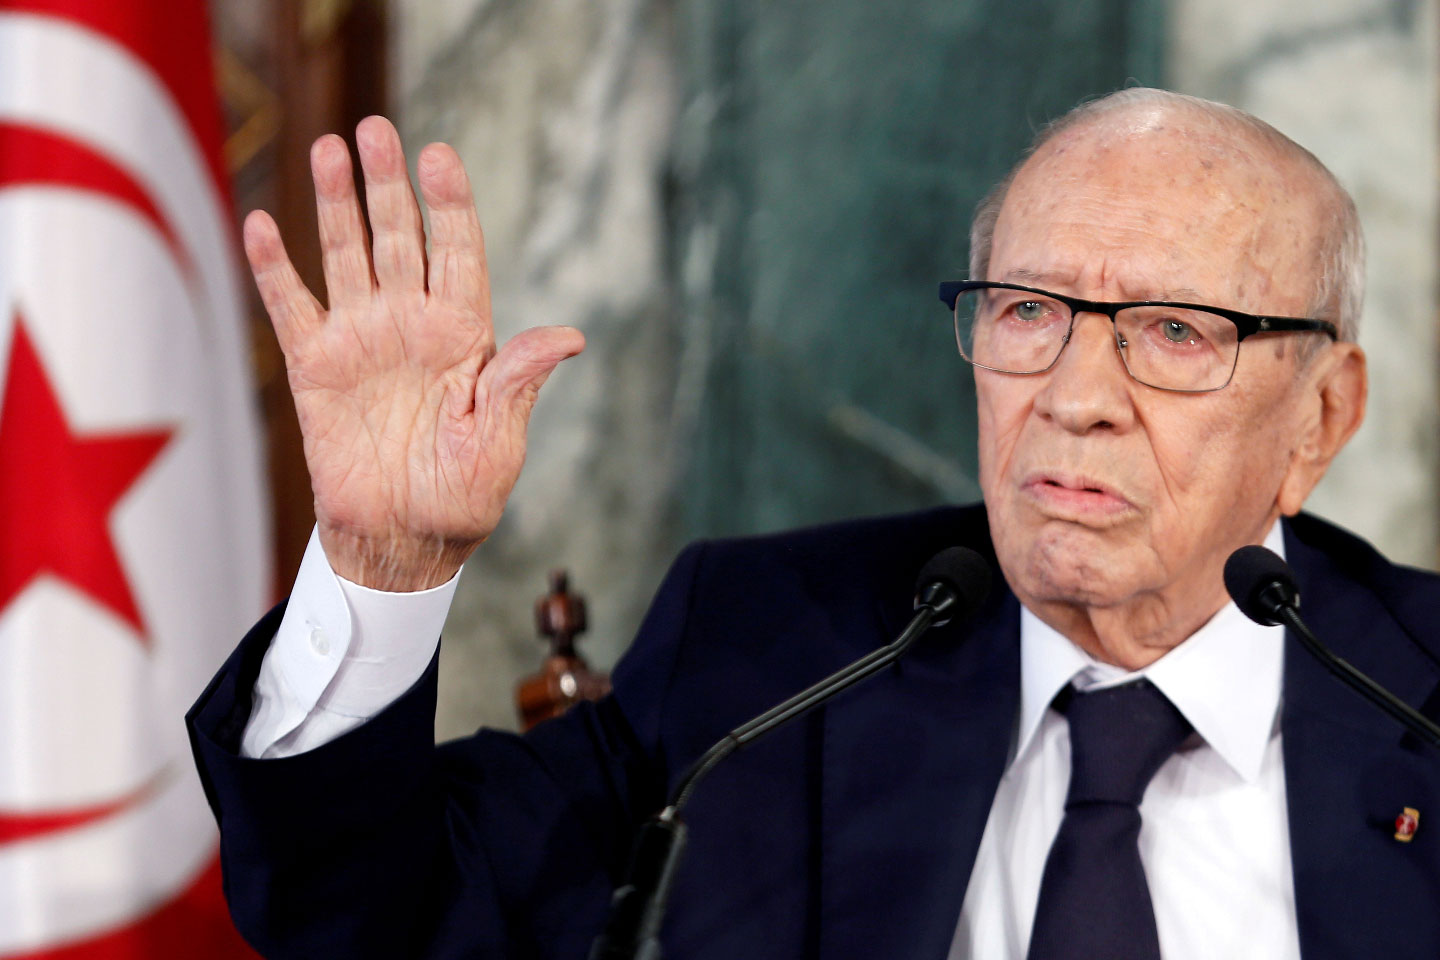 Tunisian President Beji Caid Essebsi speaks during a news conference at the Carthage Palace in Tunis, Tunisia November 8, 2018. 